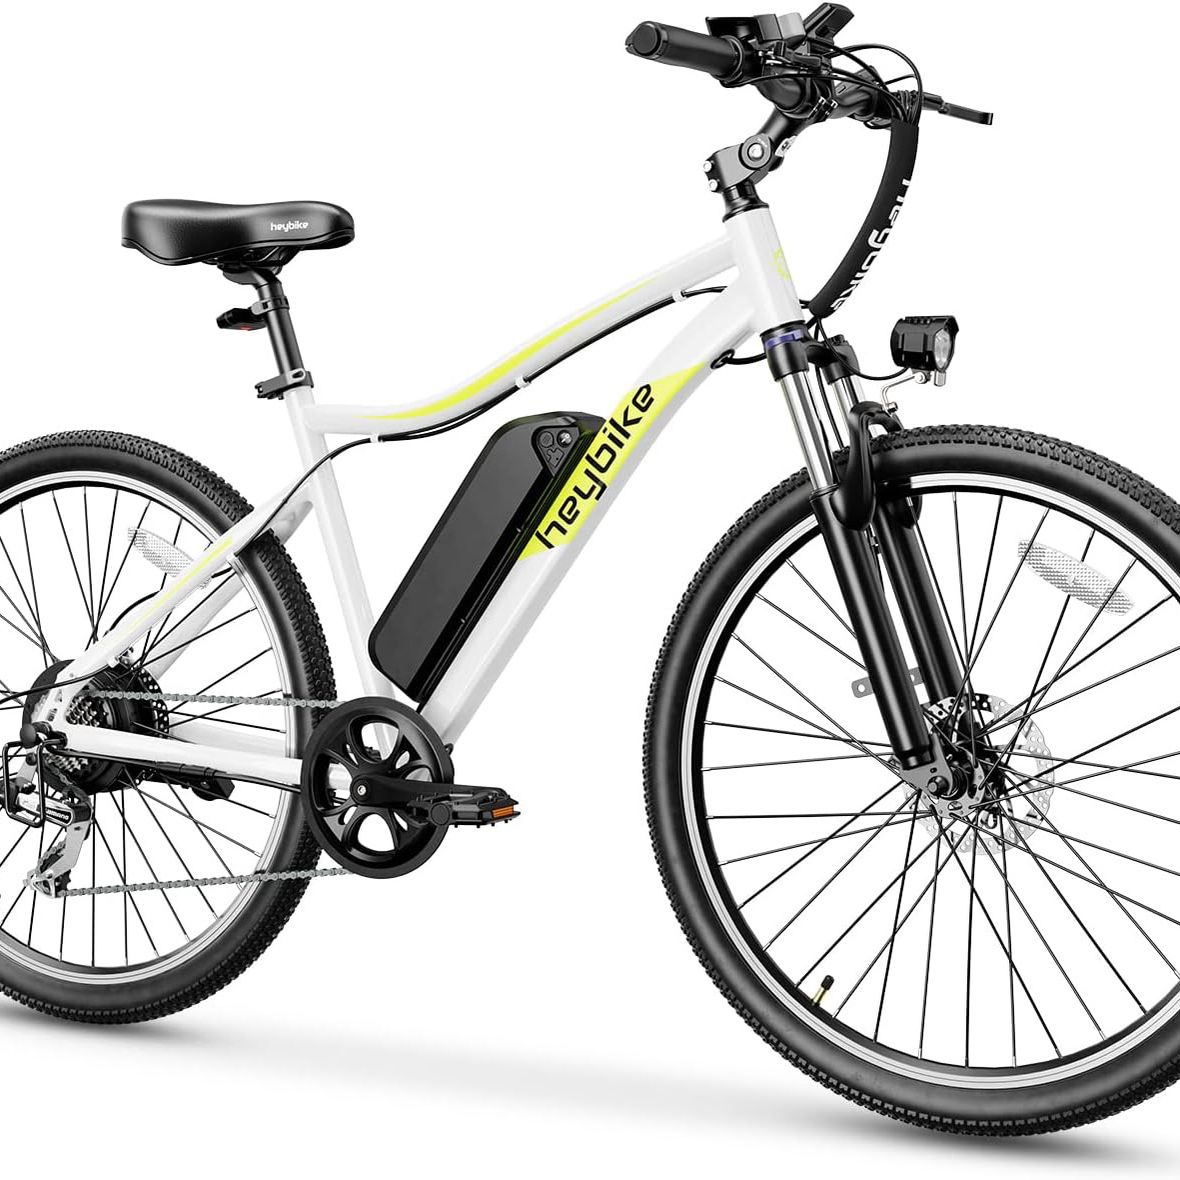 Electric Bike for Adults with 500W Motor, 22mph Max Speed, 600WH Removable Battery Ebike, 27.5" Electric Mountain Bike with 7-Speed and Front Suspensi